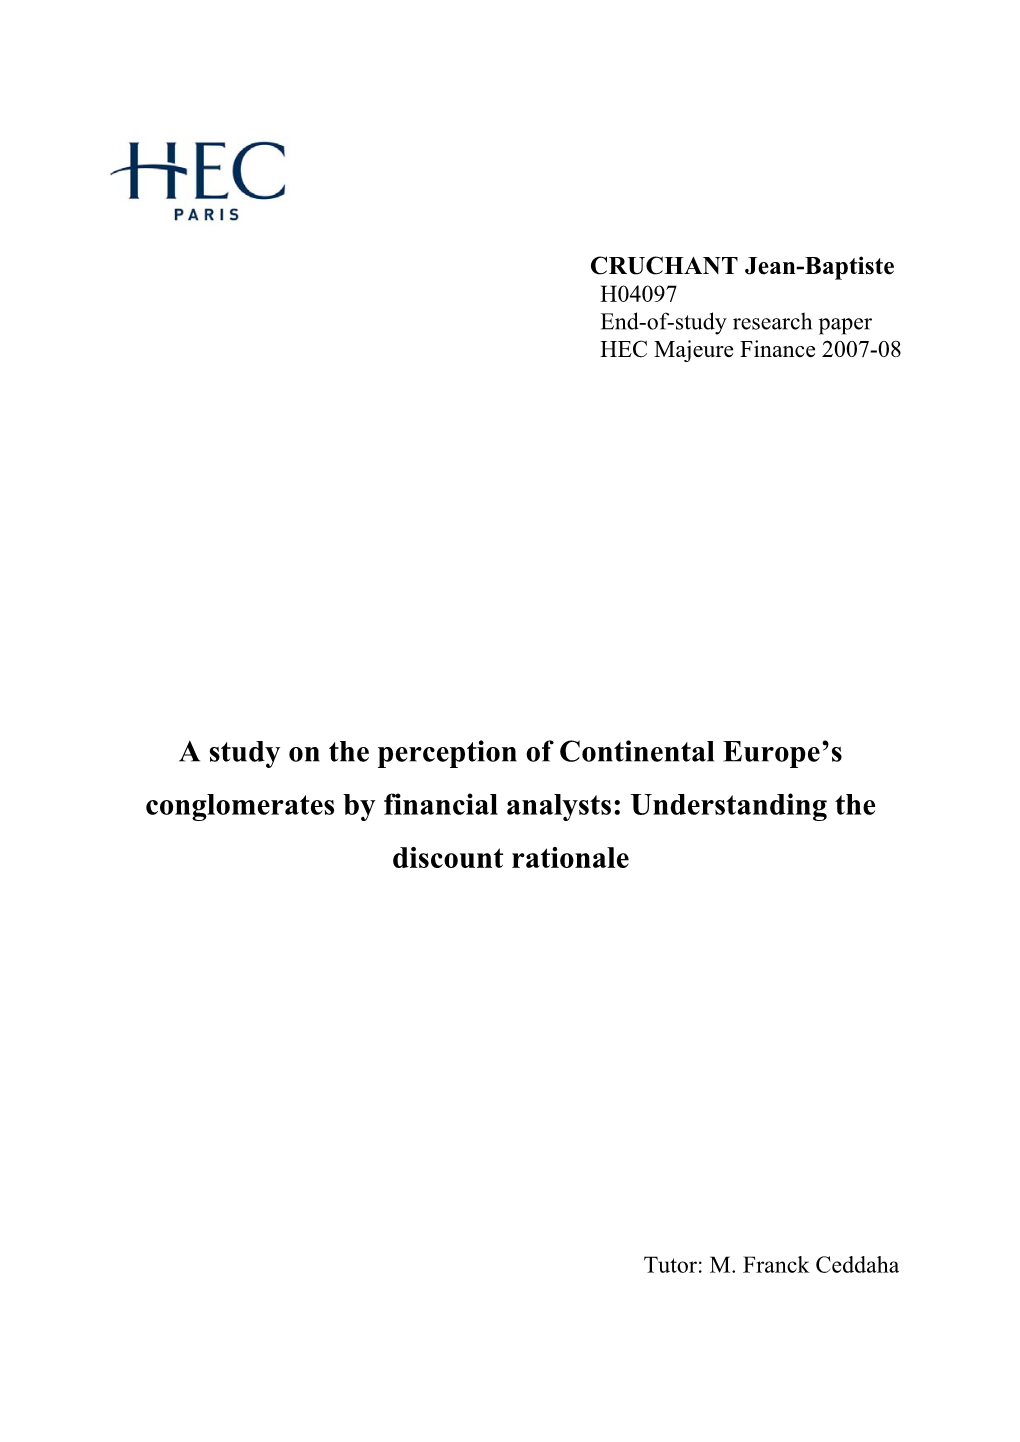 A Study on the Perception of Continental Europe's